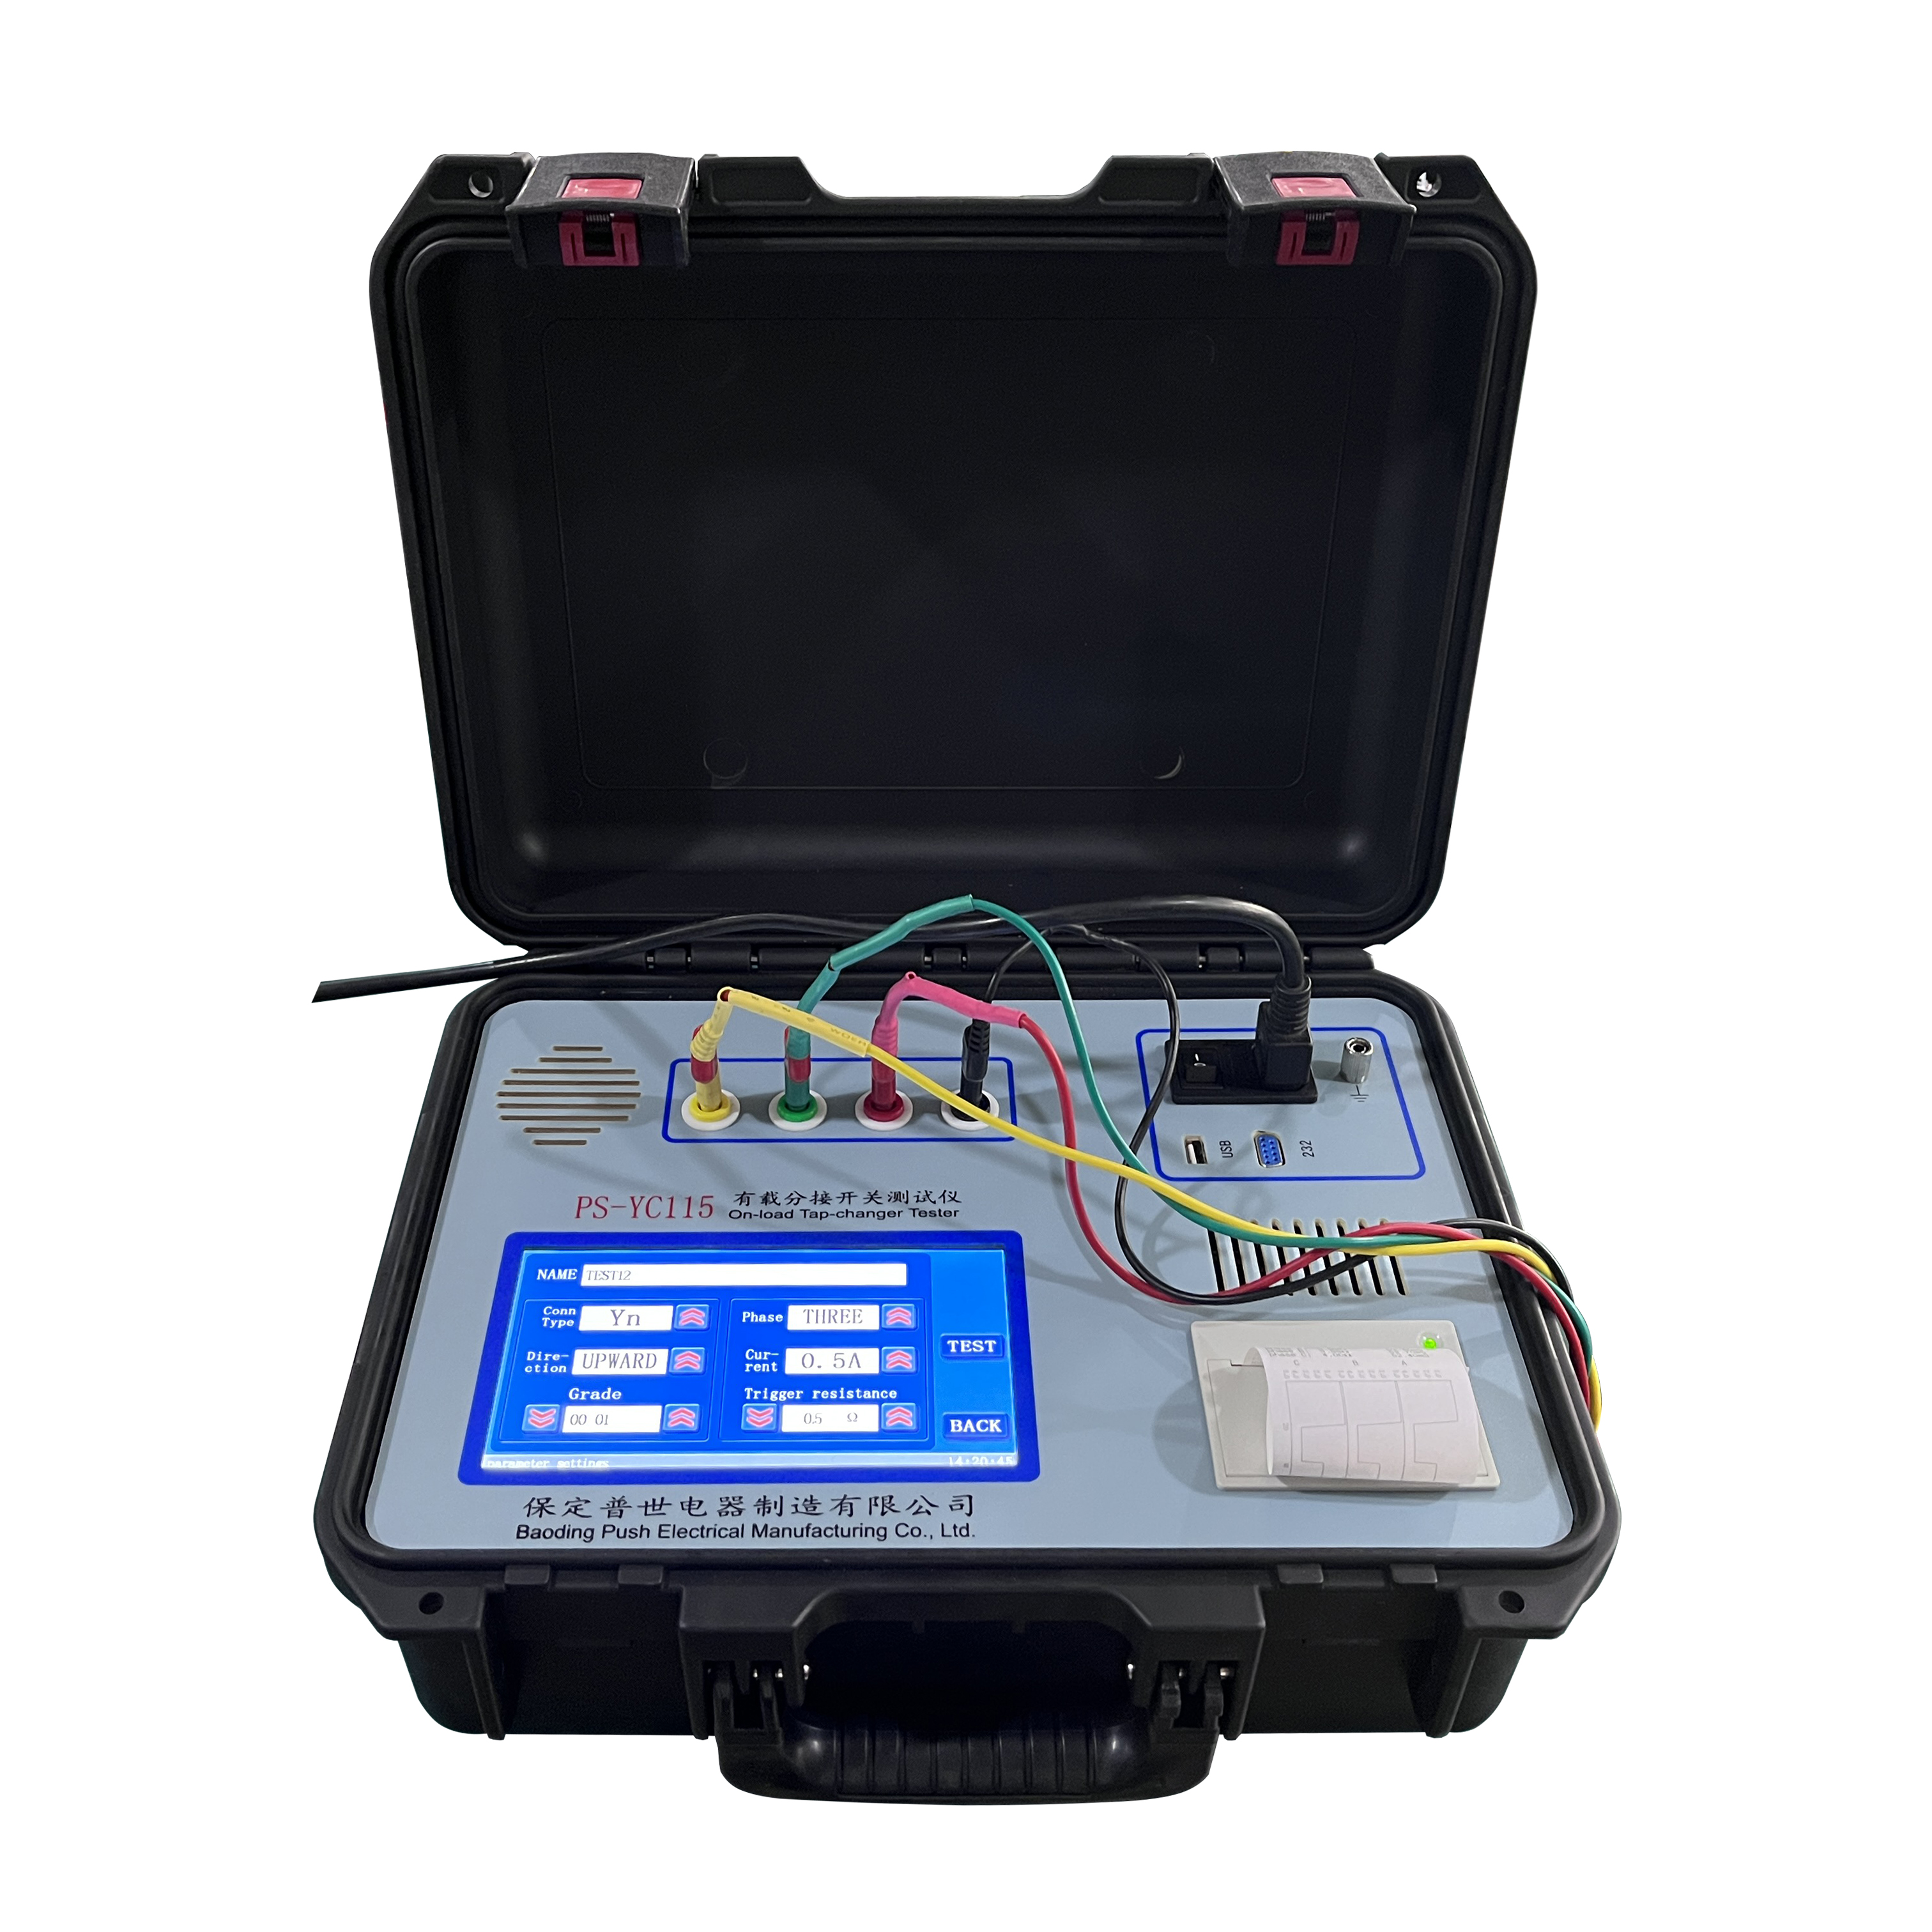 PS-YC115 On-load tap-changer tester Featured Image